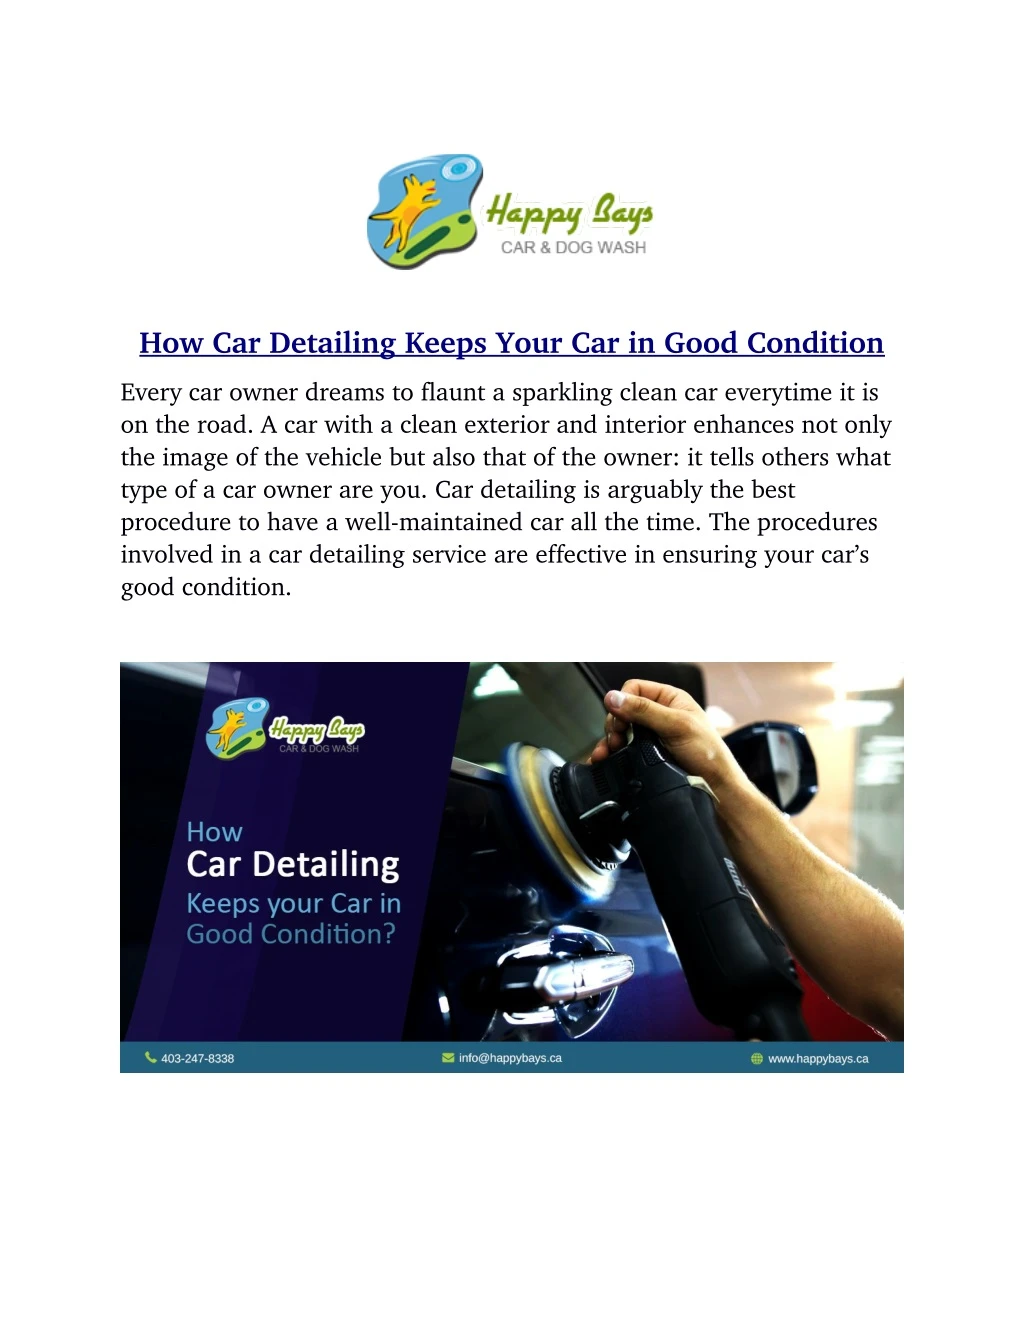 how car detailing keeps your car in good condition